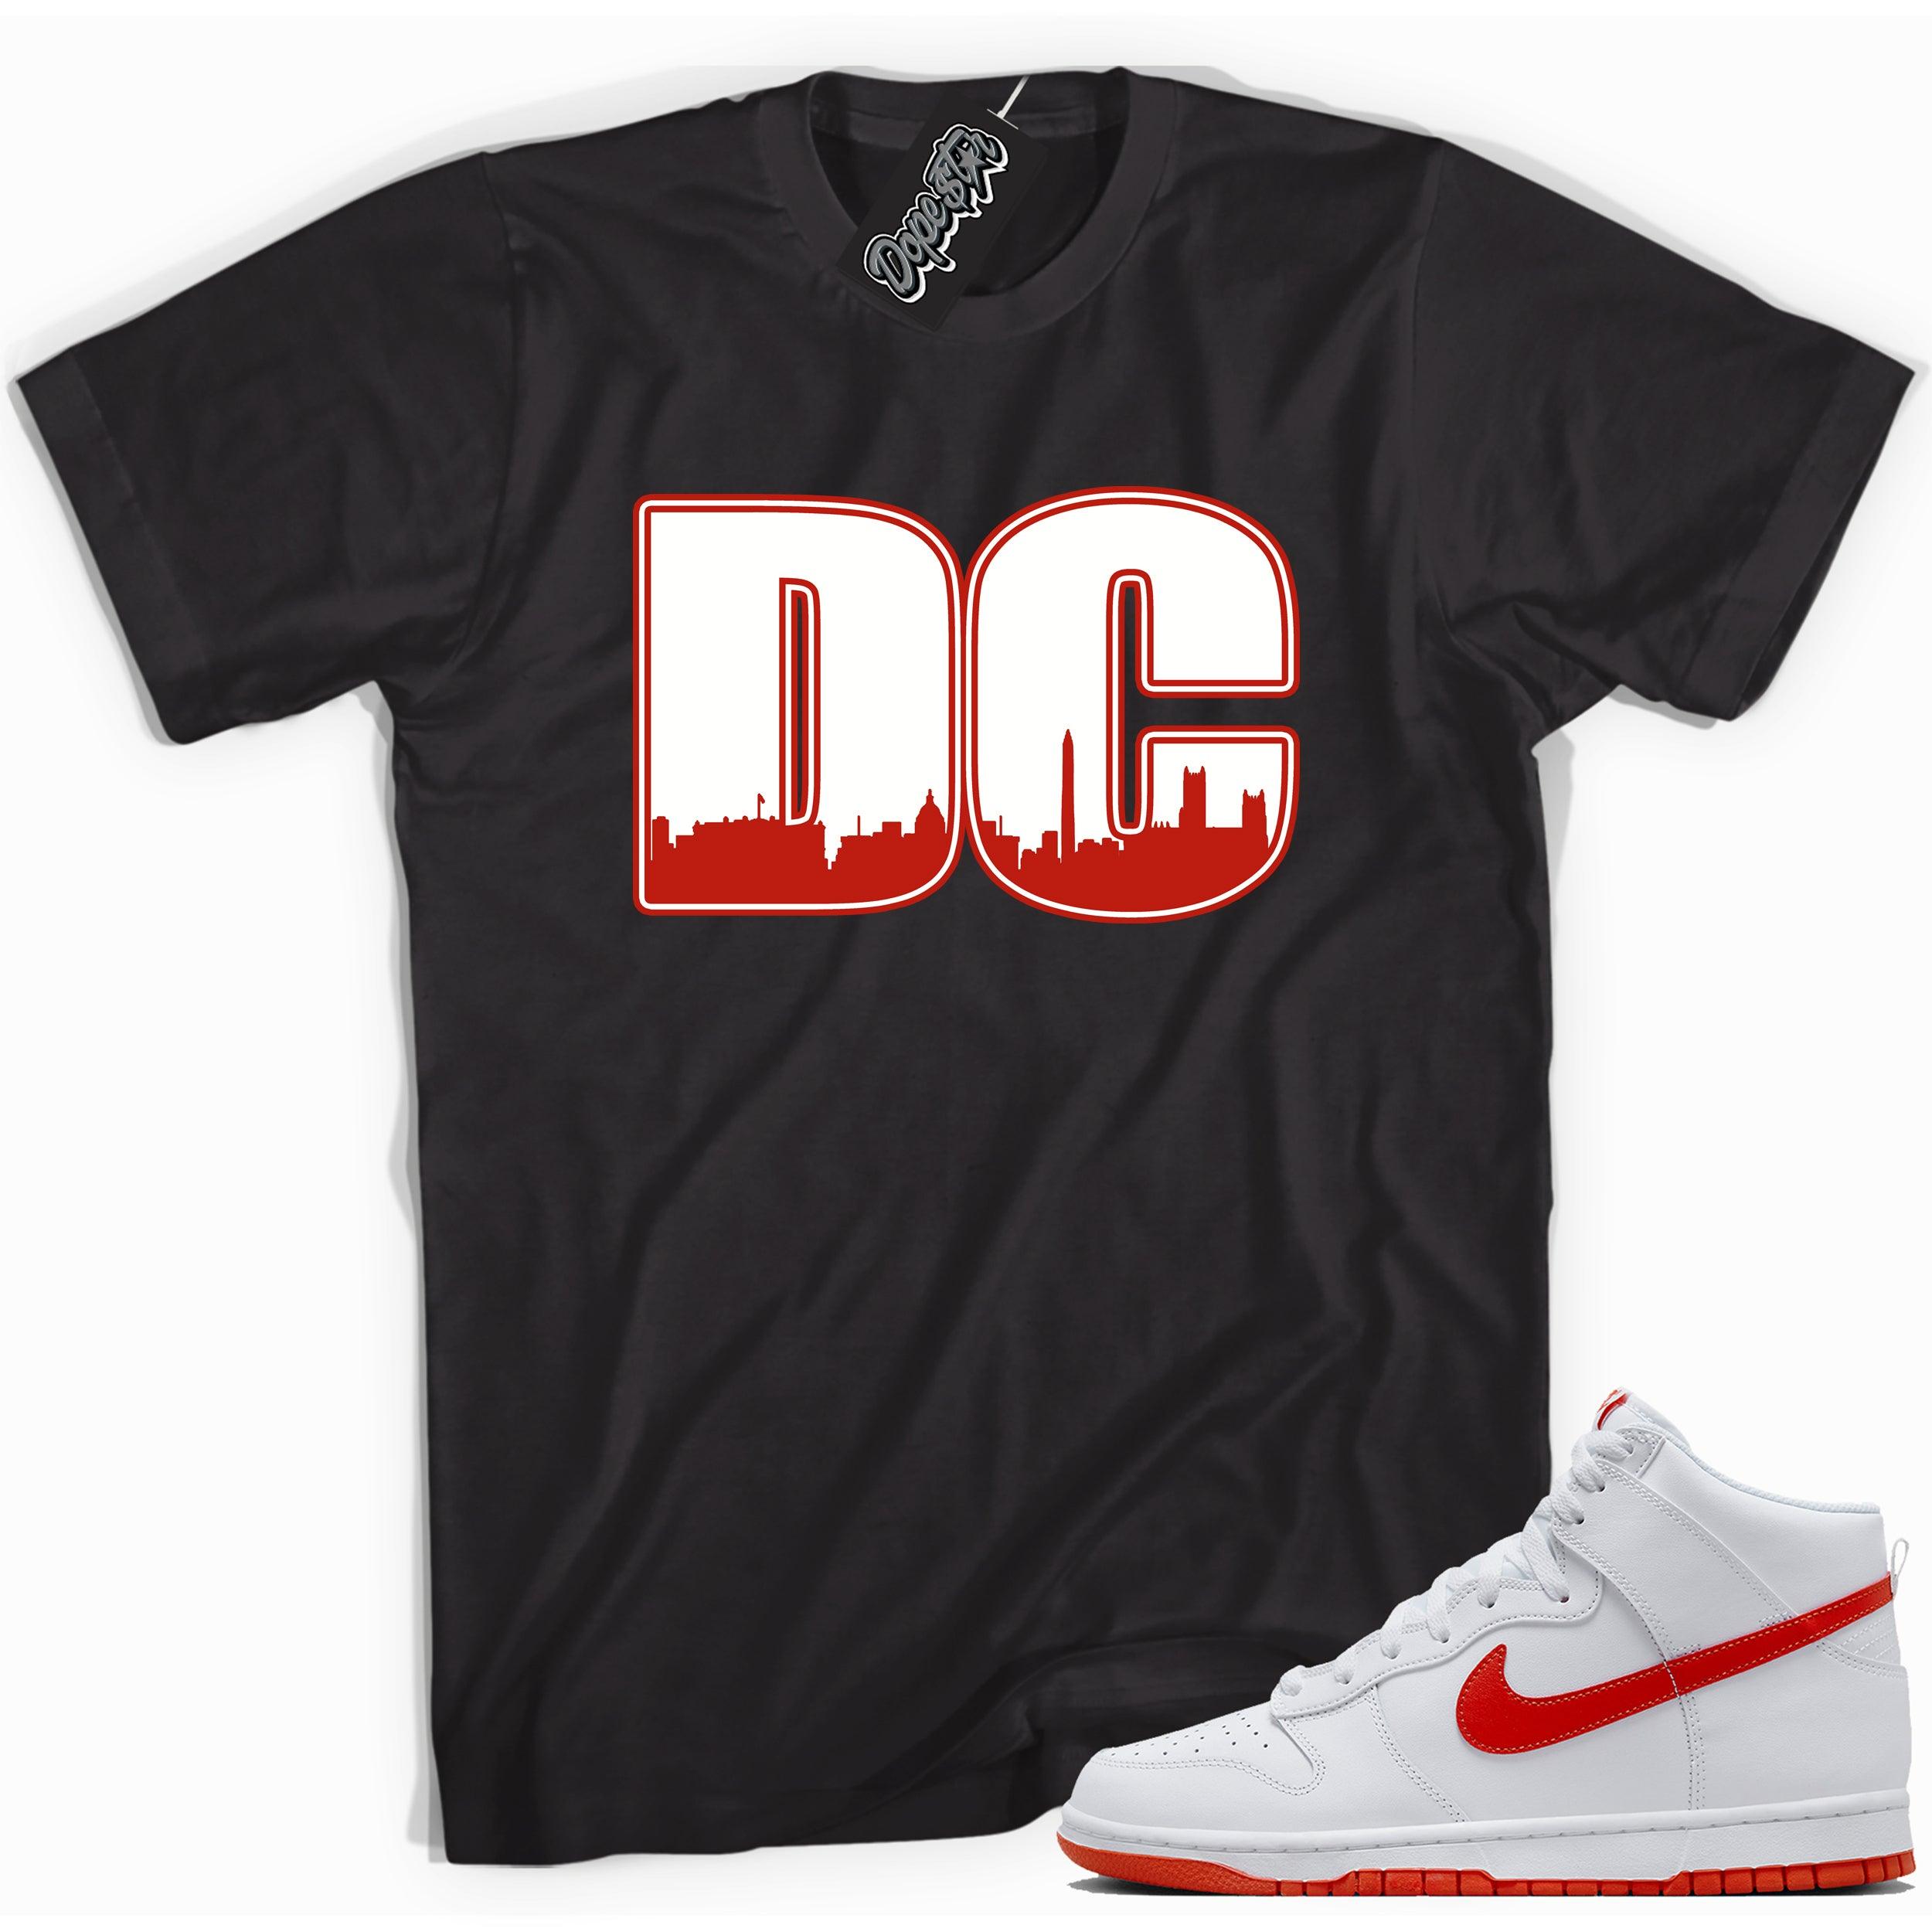 Cool black graphic tee with 'DC' print, that perfectly matches Nike Dunk High White Picante Red sneakers.